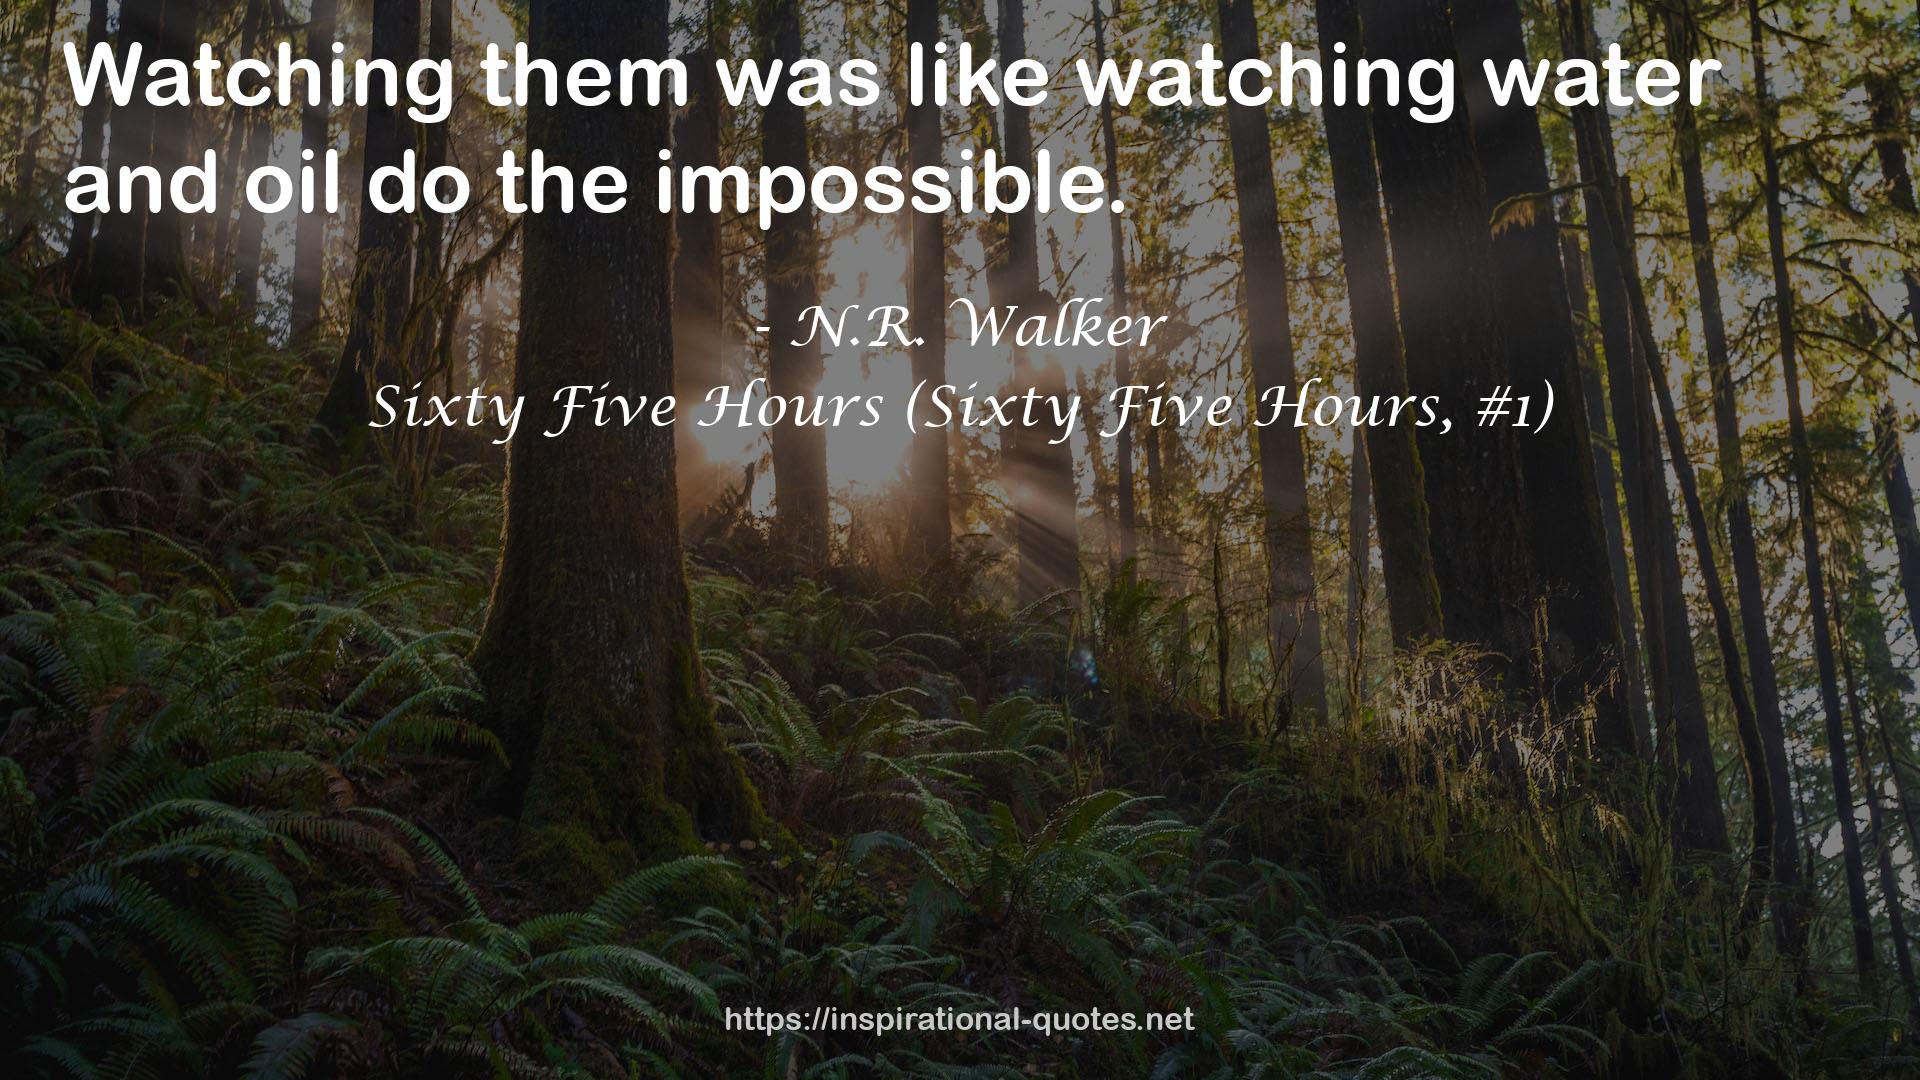 Sixty Five Hours (Sixty Five Hours, #1) QUOTES